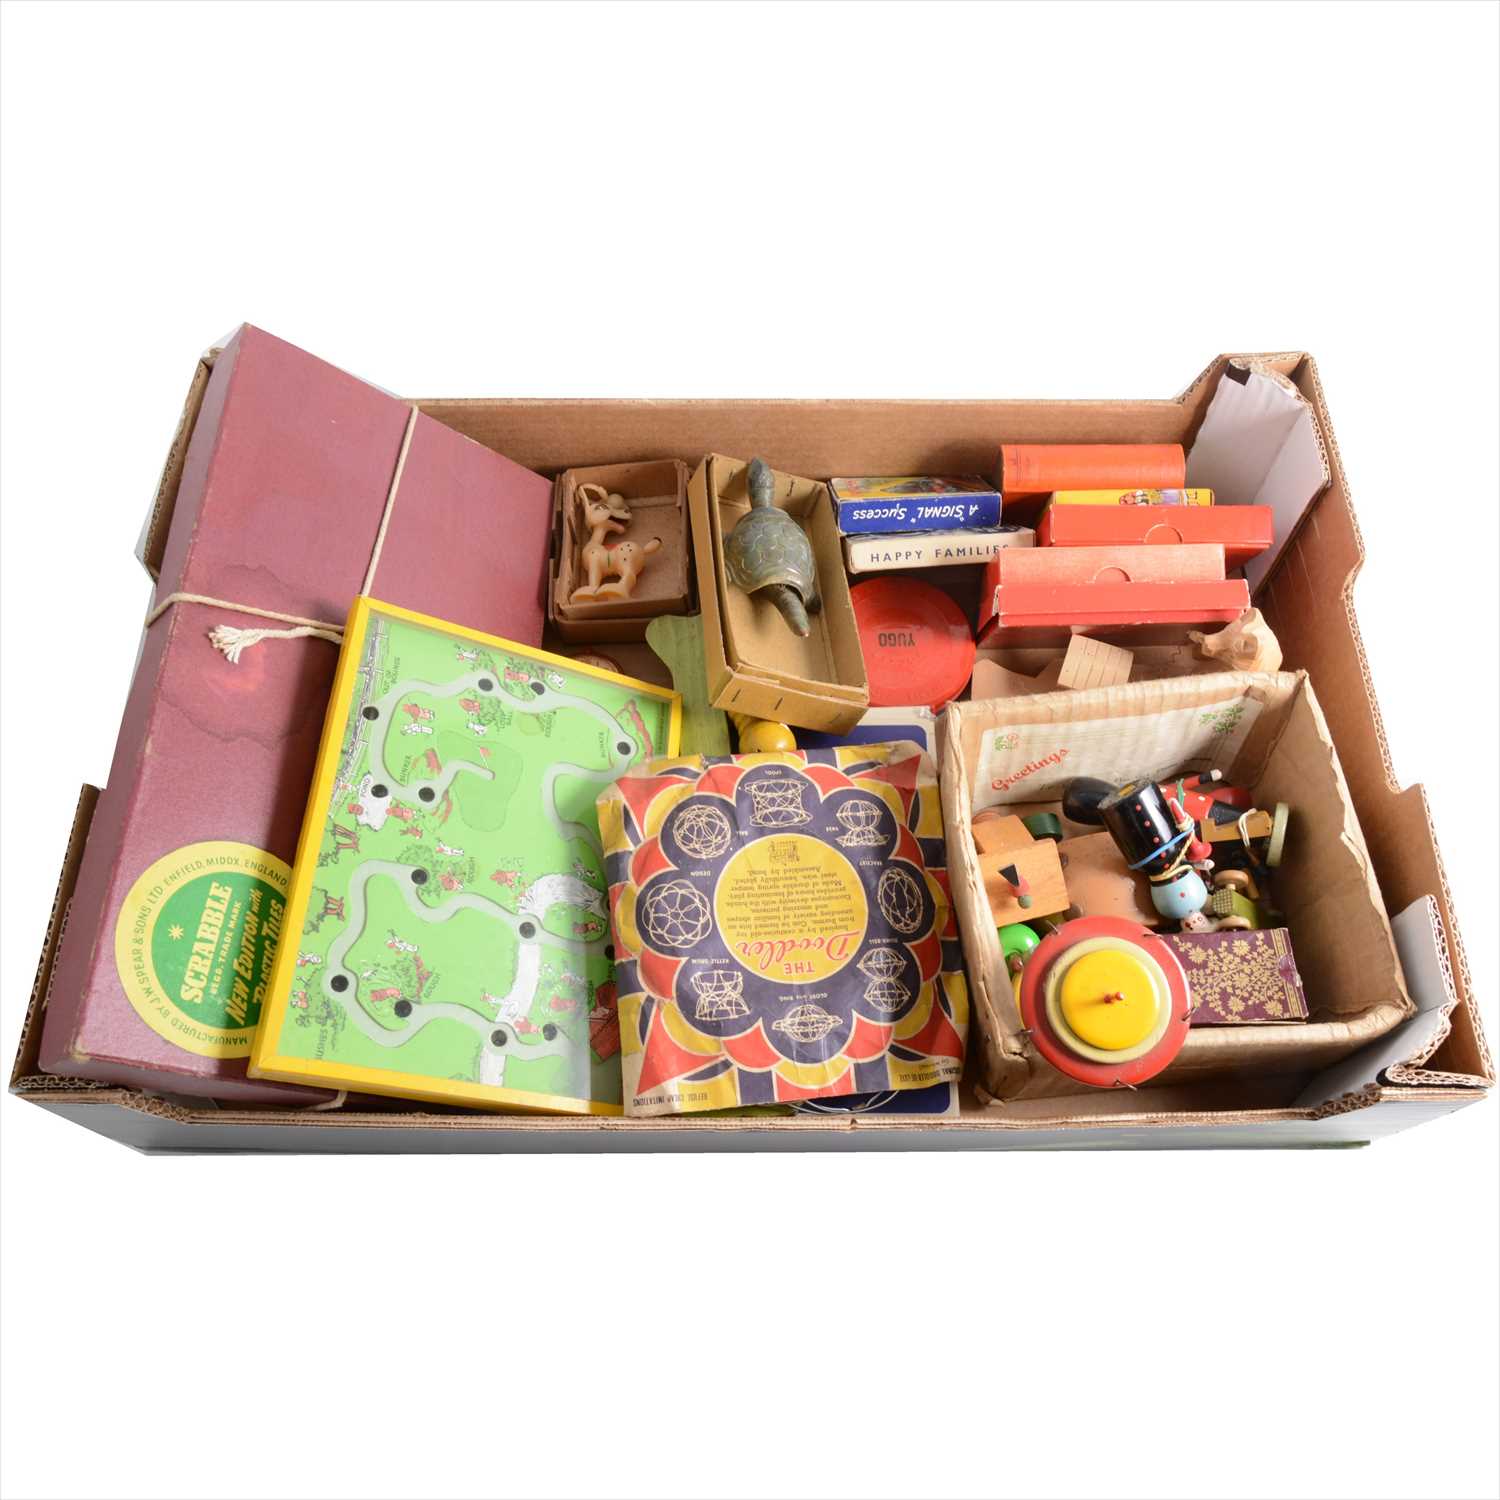 Lot 298 - Vintage toys and games; one box including wooden toys, card games, early plastic toys, etc